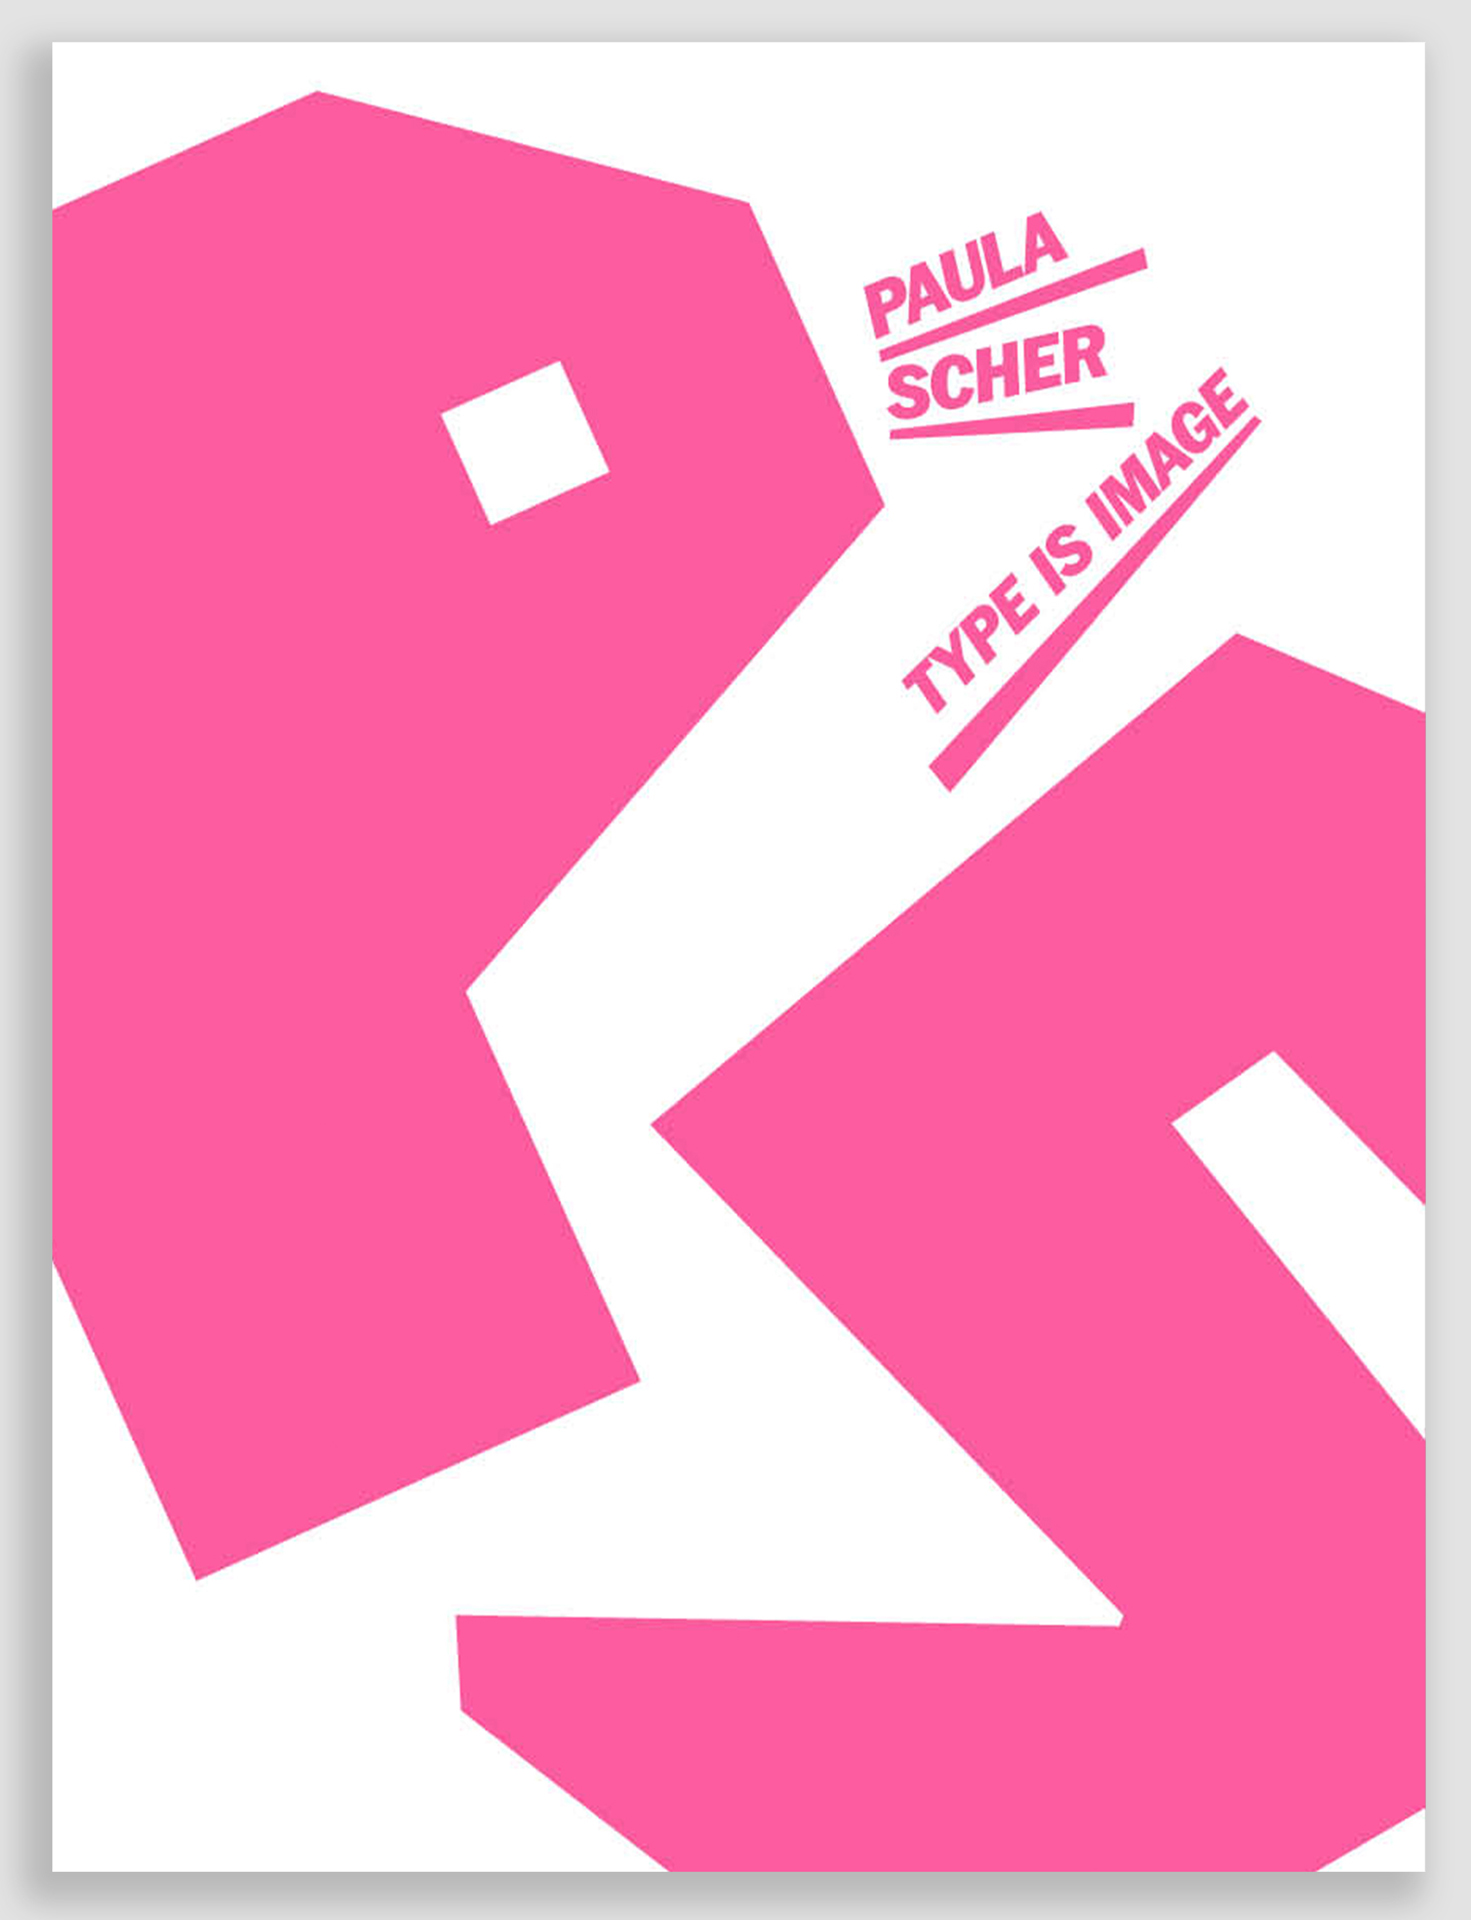 Cover of the exhibition catalogue. The letters P and S are printed large in pink on the catalogue cover. Paula Scher, Type is image is written in pink in the top right-hand corner.